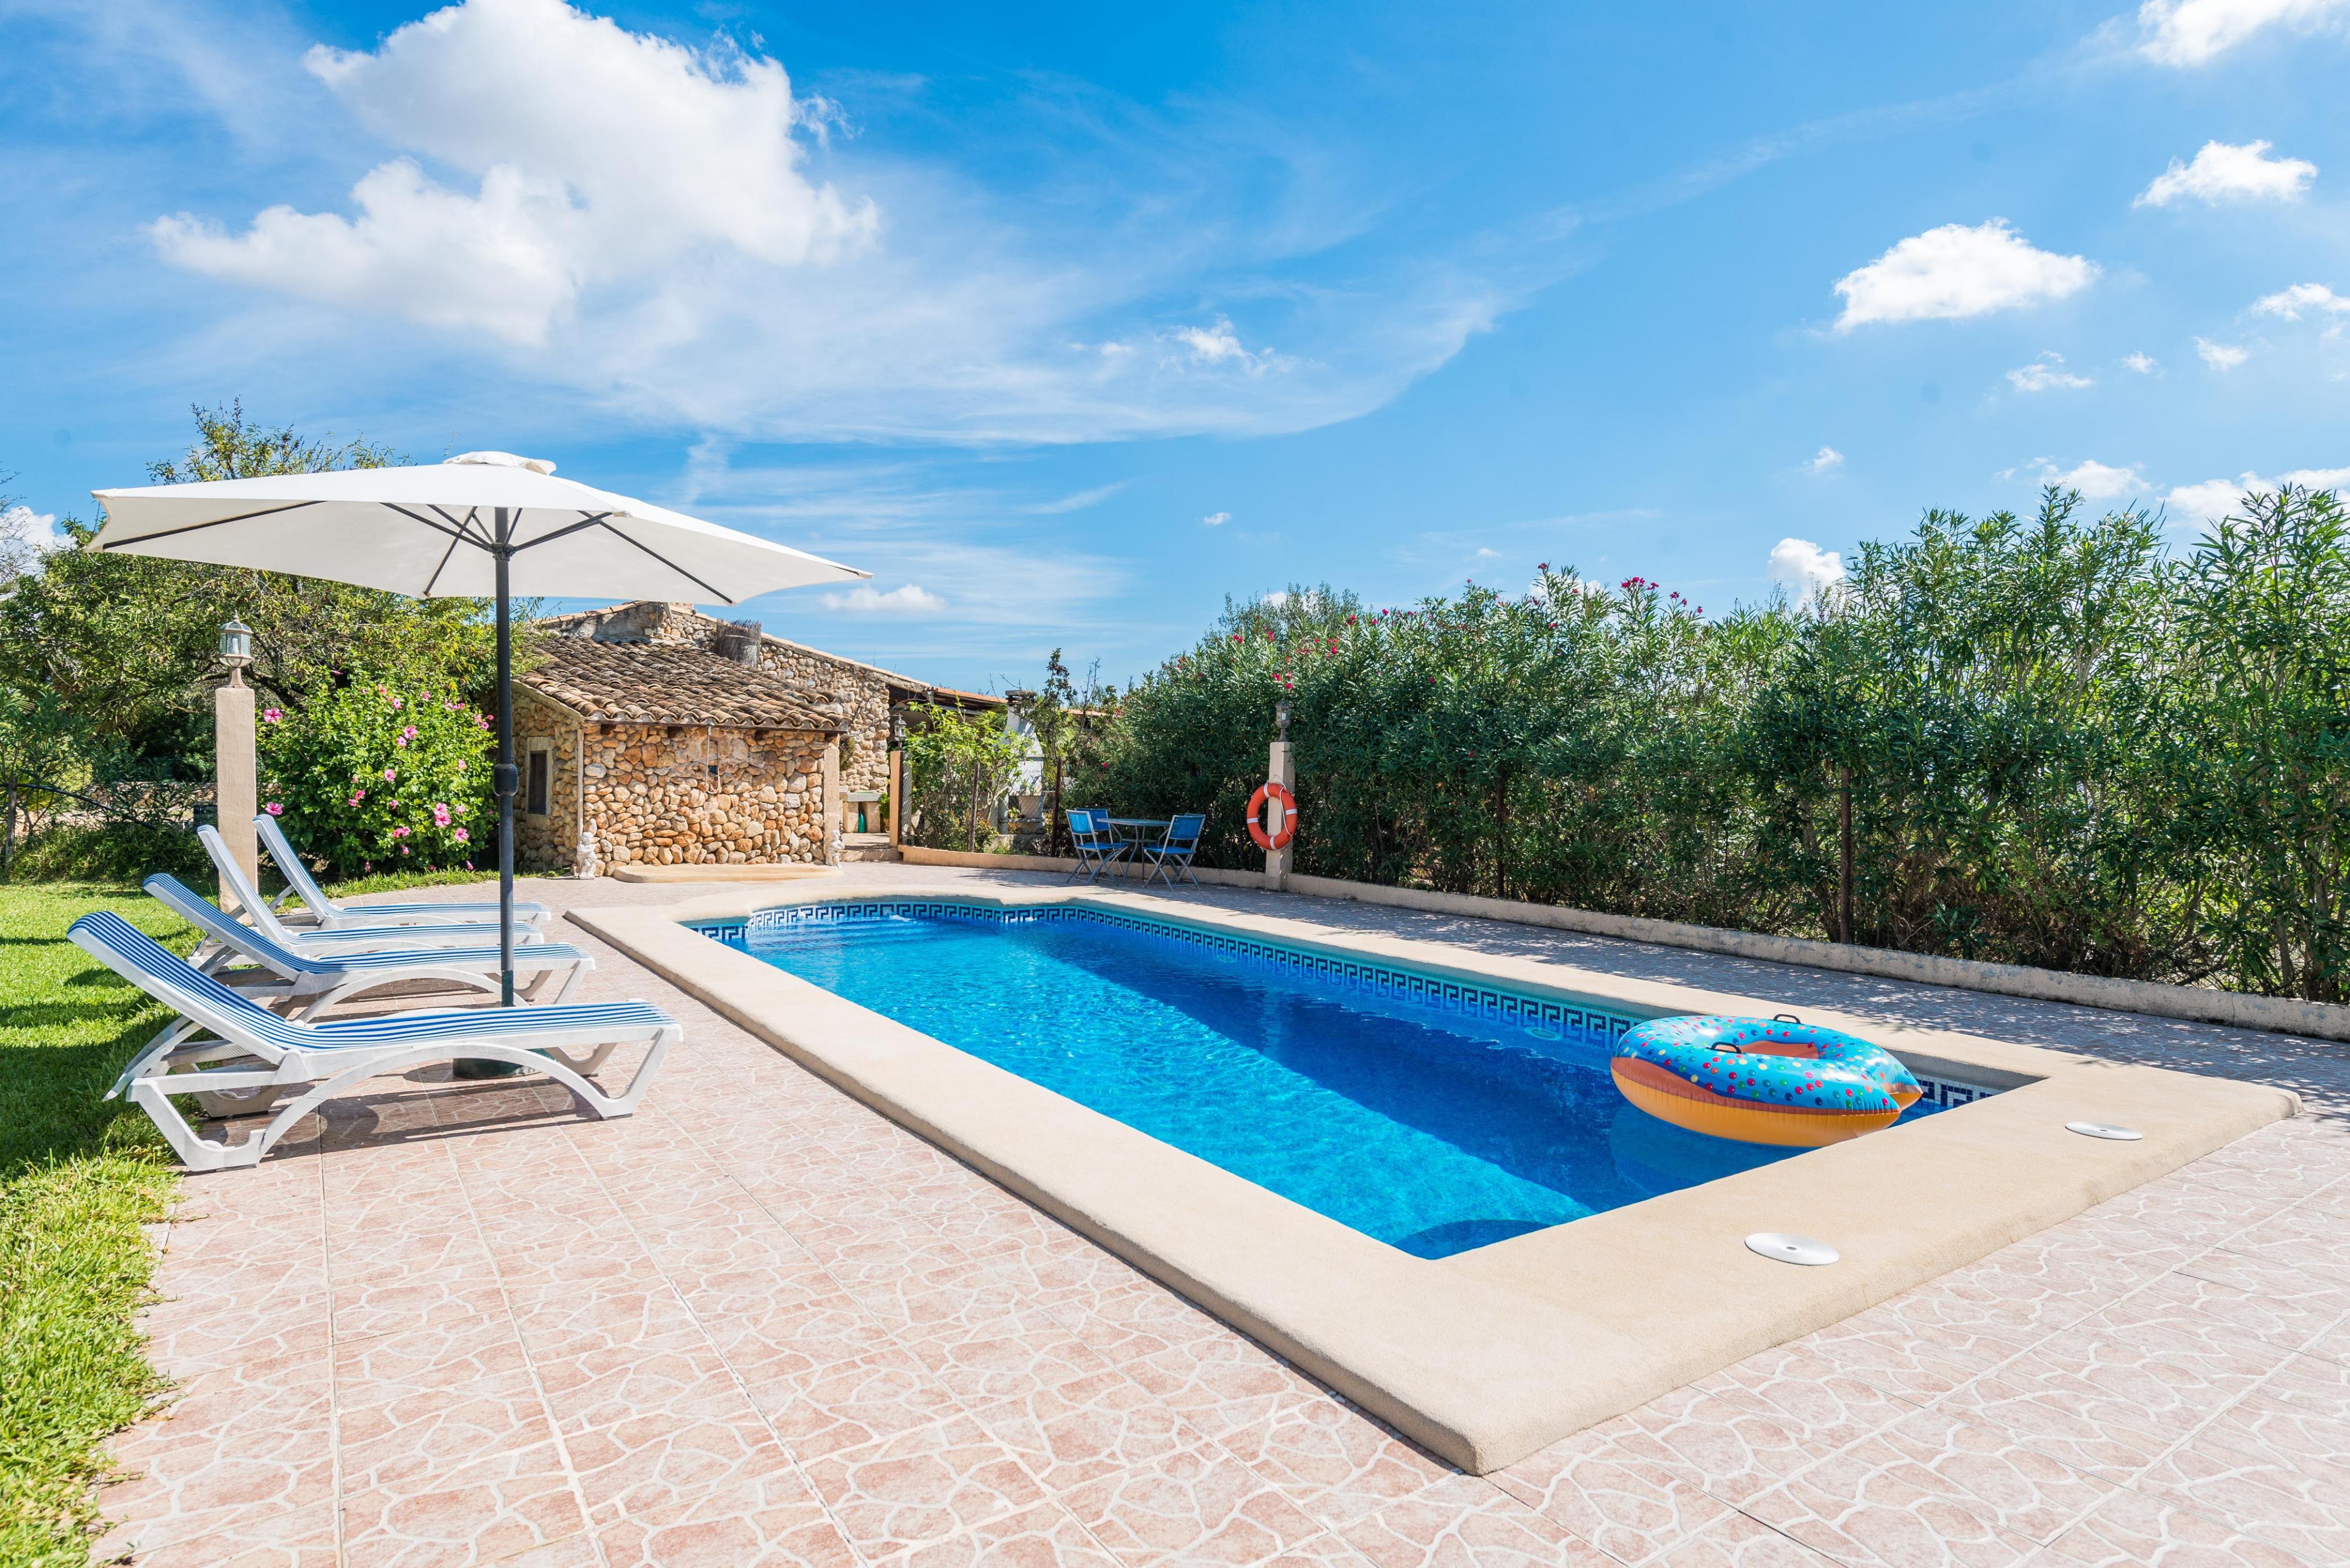 Property Image 2 - SA FIGUERA BLANCA - Great traditional villa with private pool in inland Majorca.